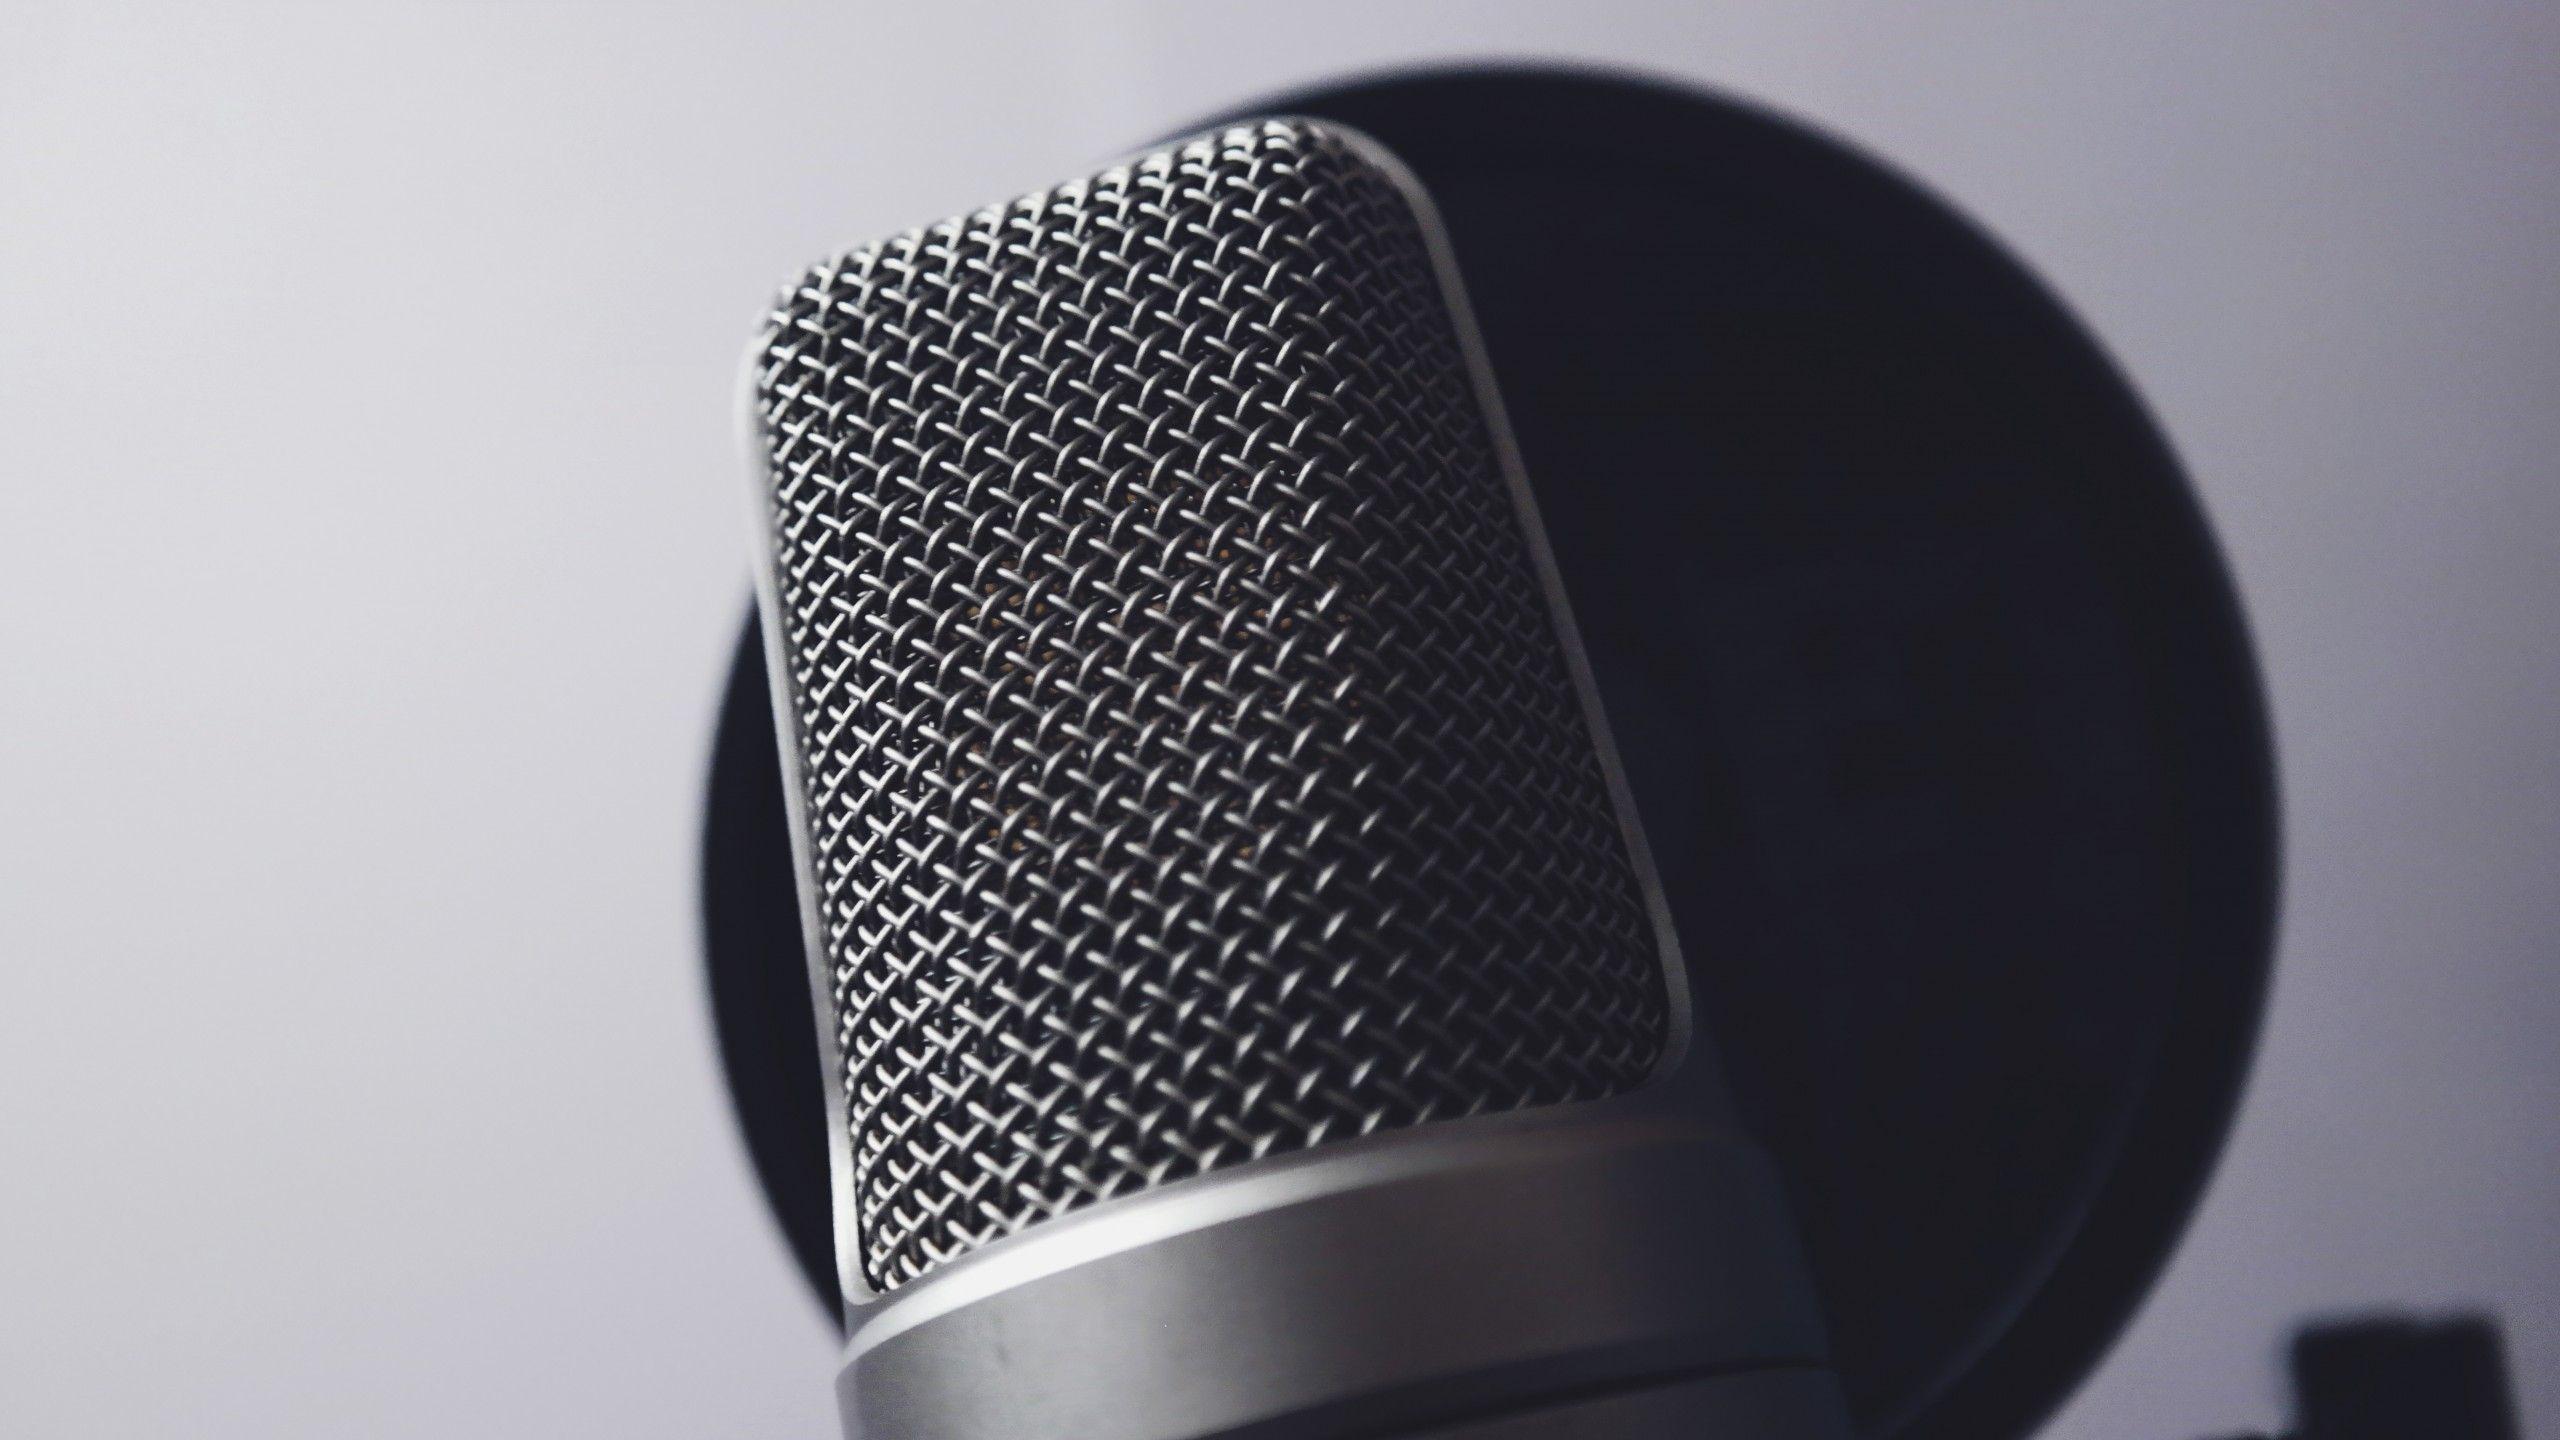 Download 2560x1440 Microphone, Close Up Wallpaper For IMac 27 Inch